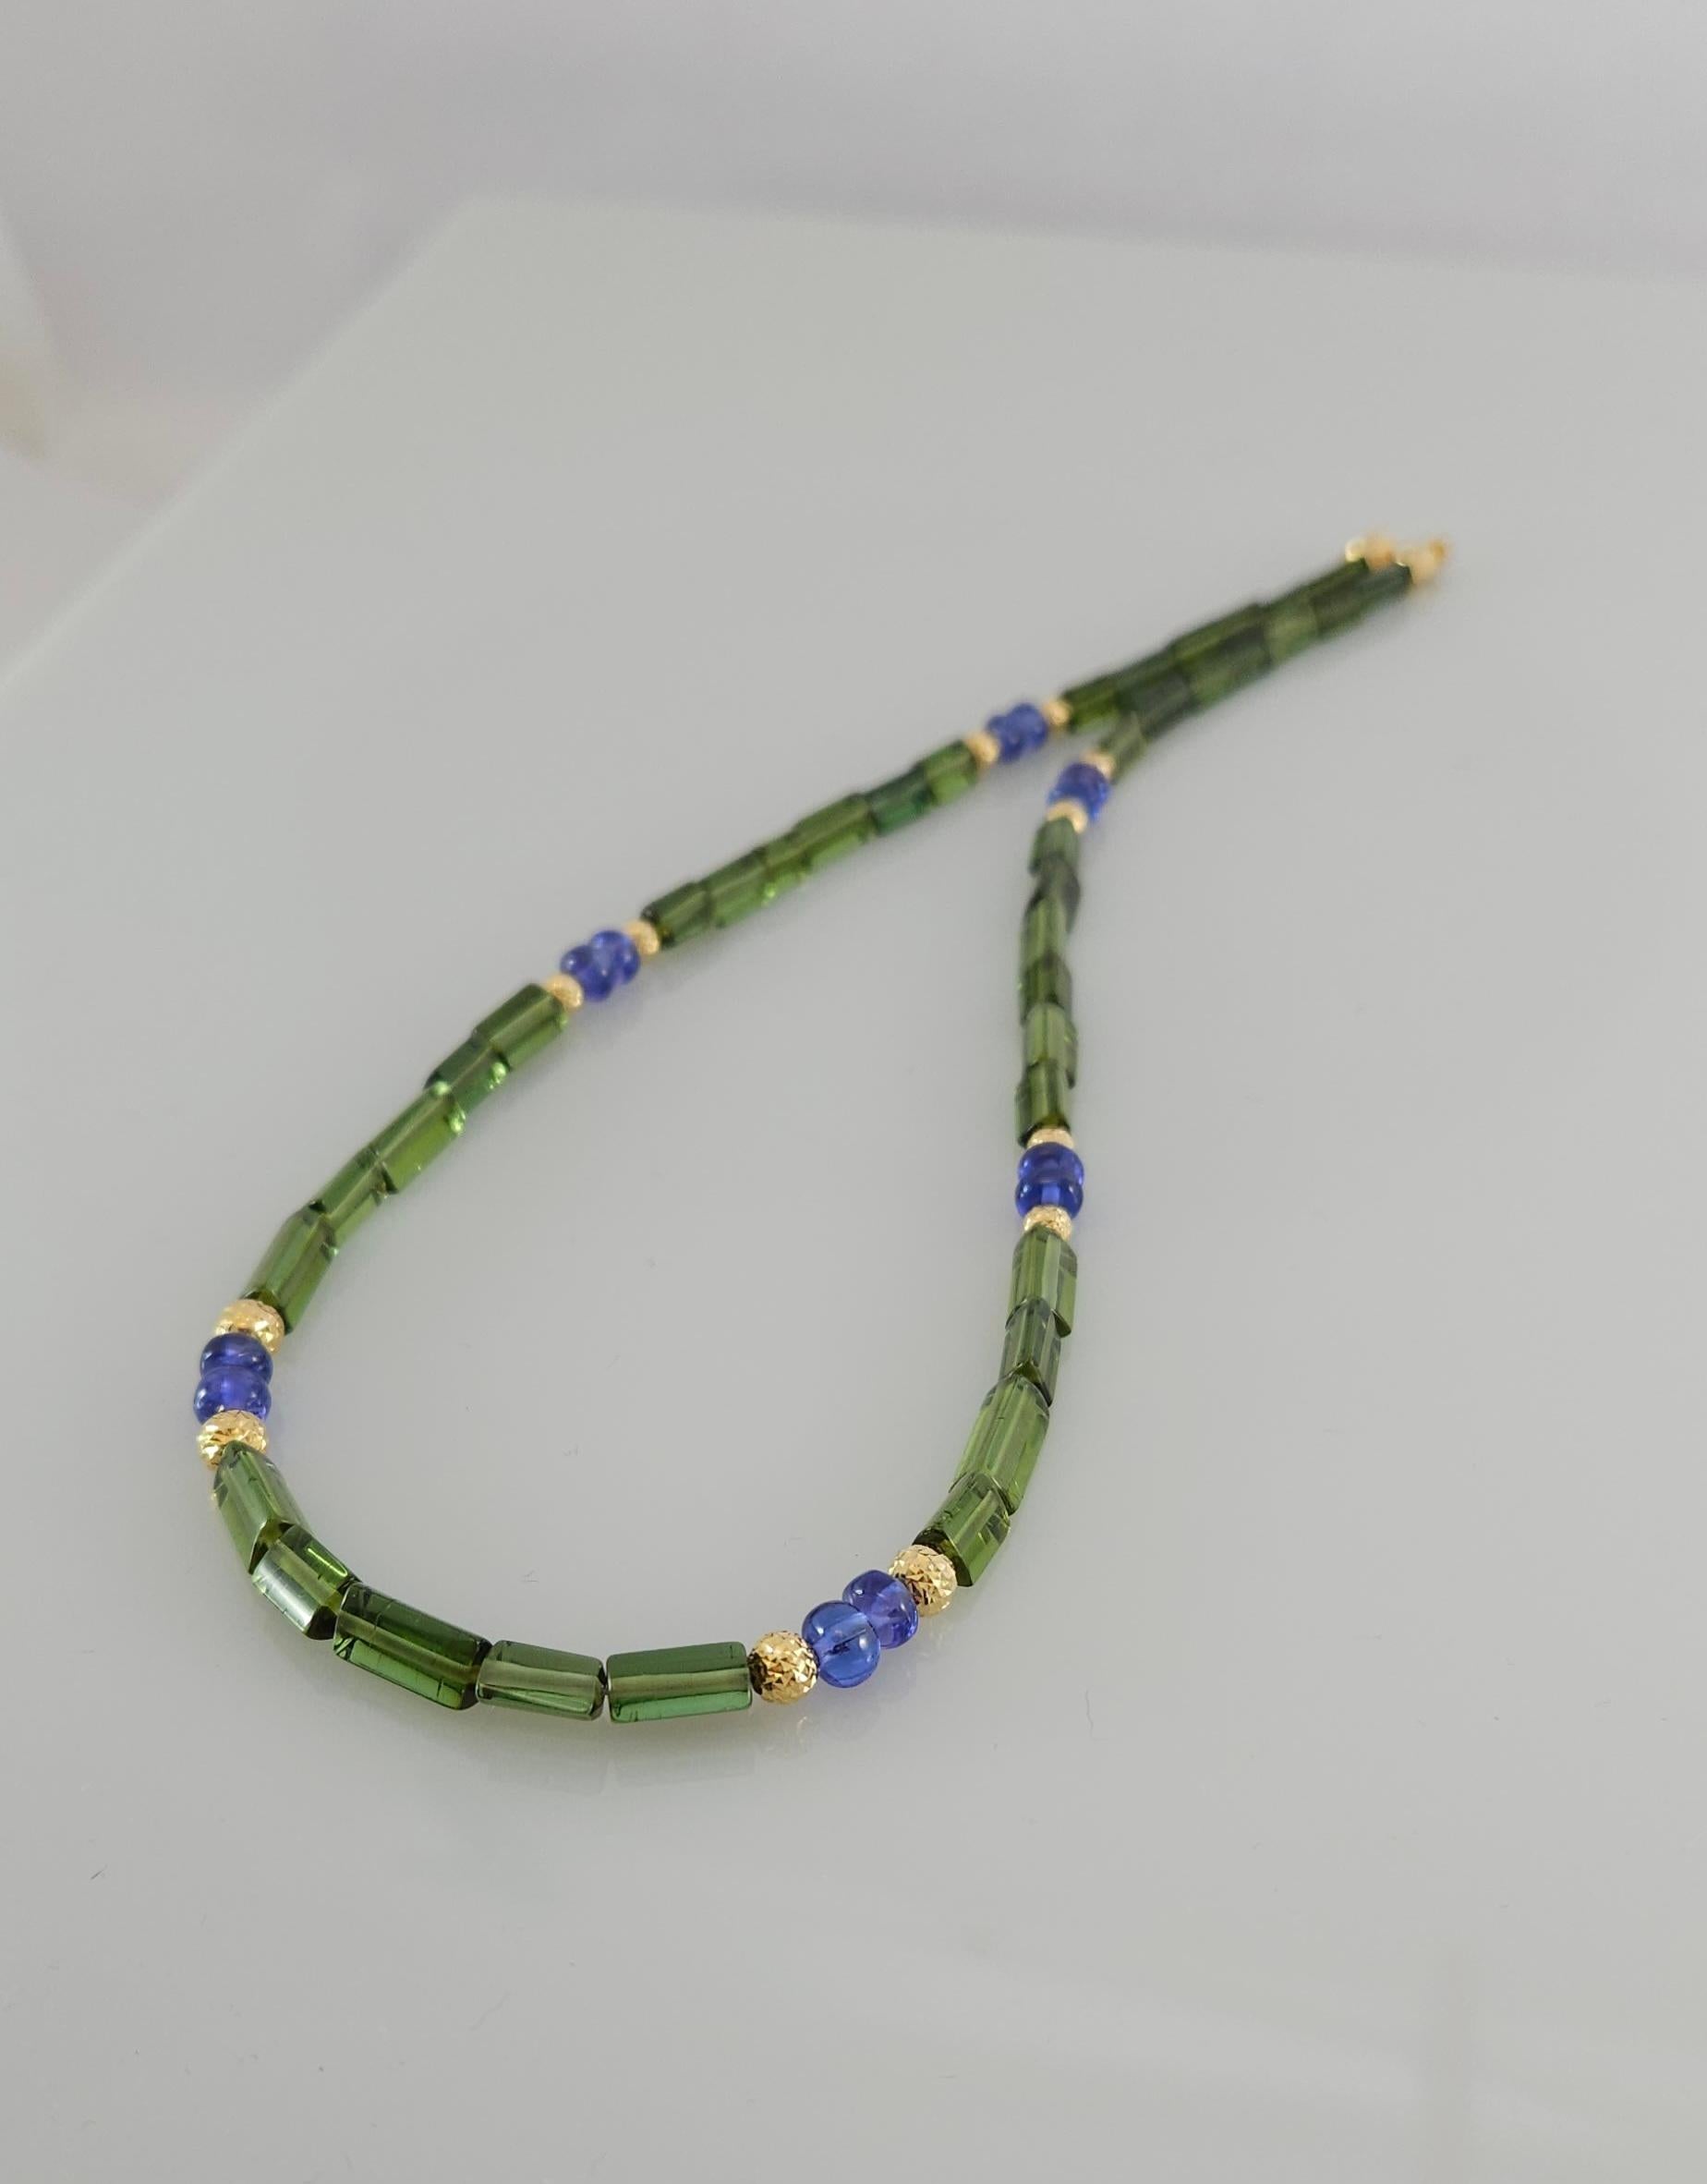 Green Tourmaline Crystal & Tanzanite Beaded Necklace with 18 Carat yellow Gold For Sale 8